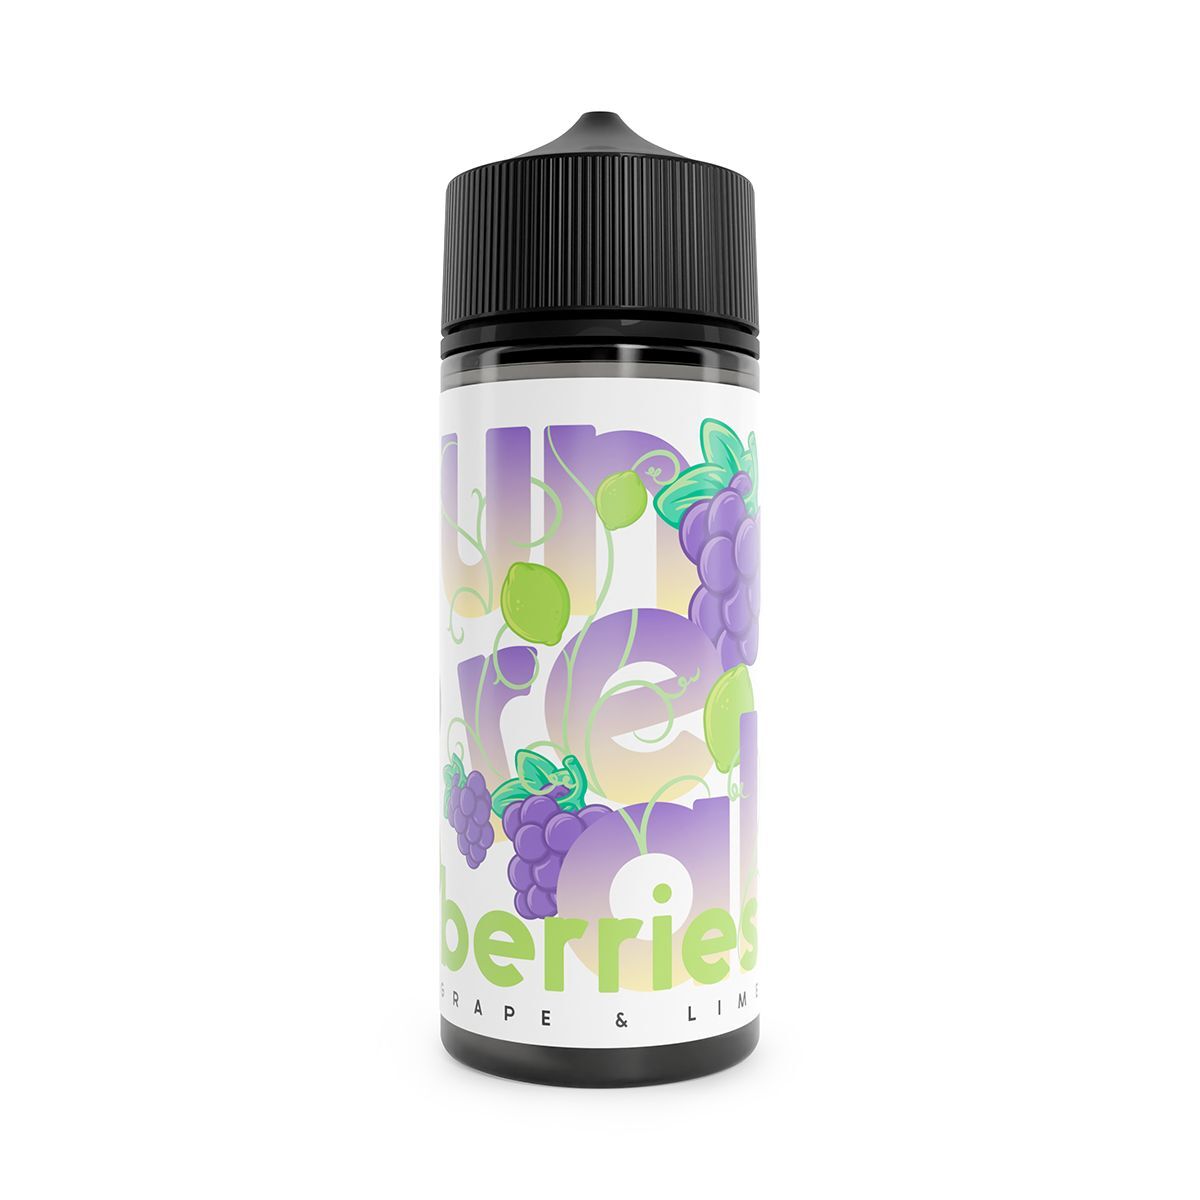 Grape & Lime Shortfill by Unreal. - 100ml-Supergood.